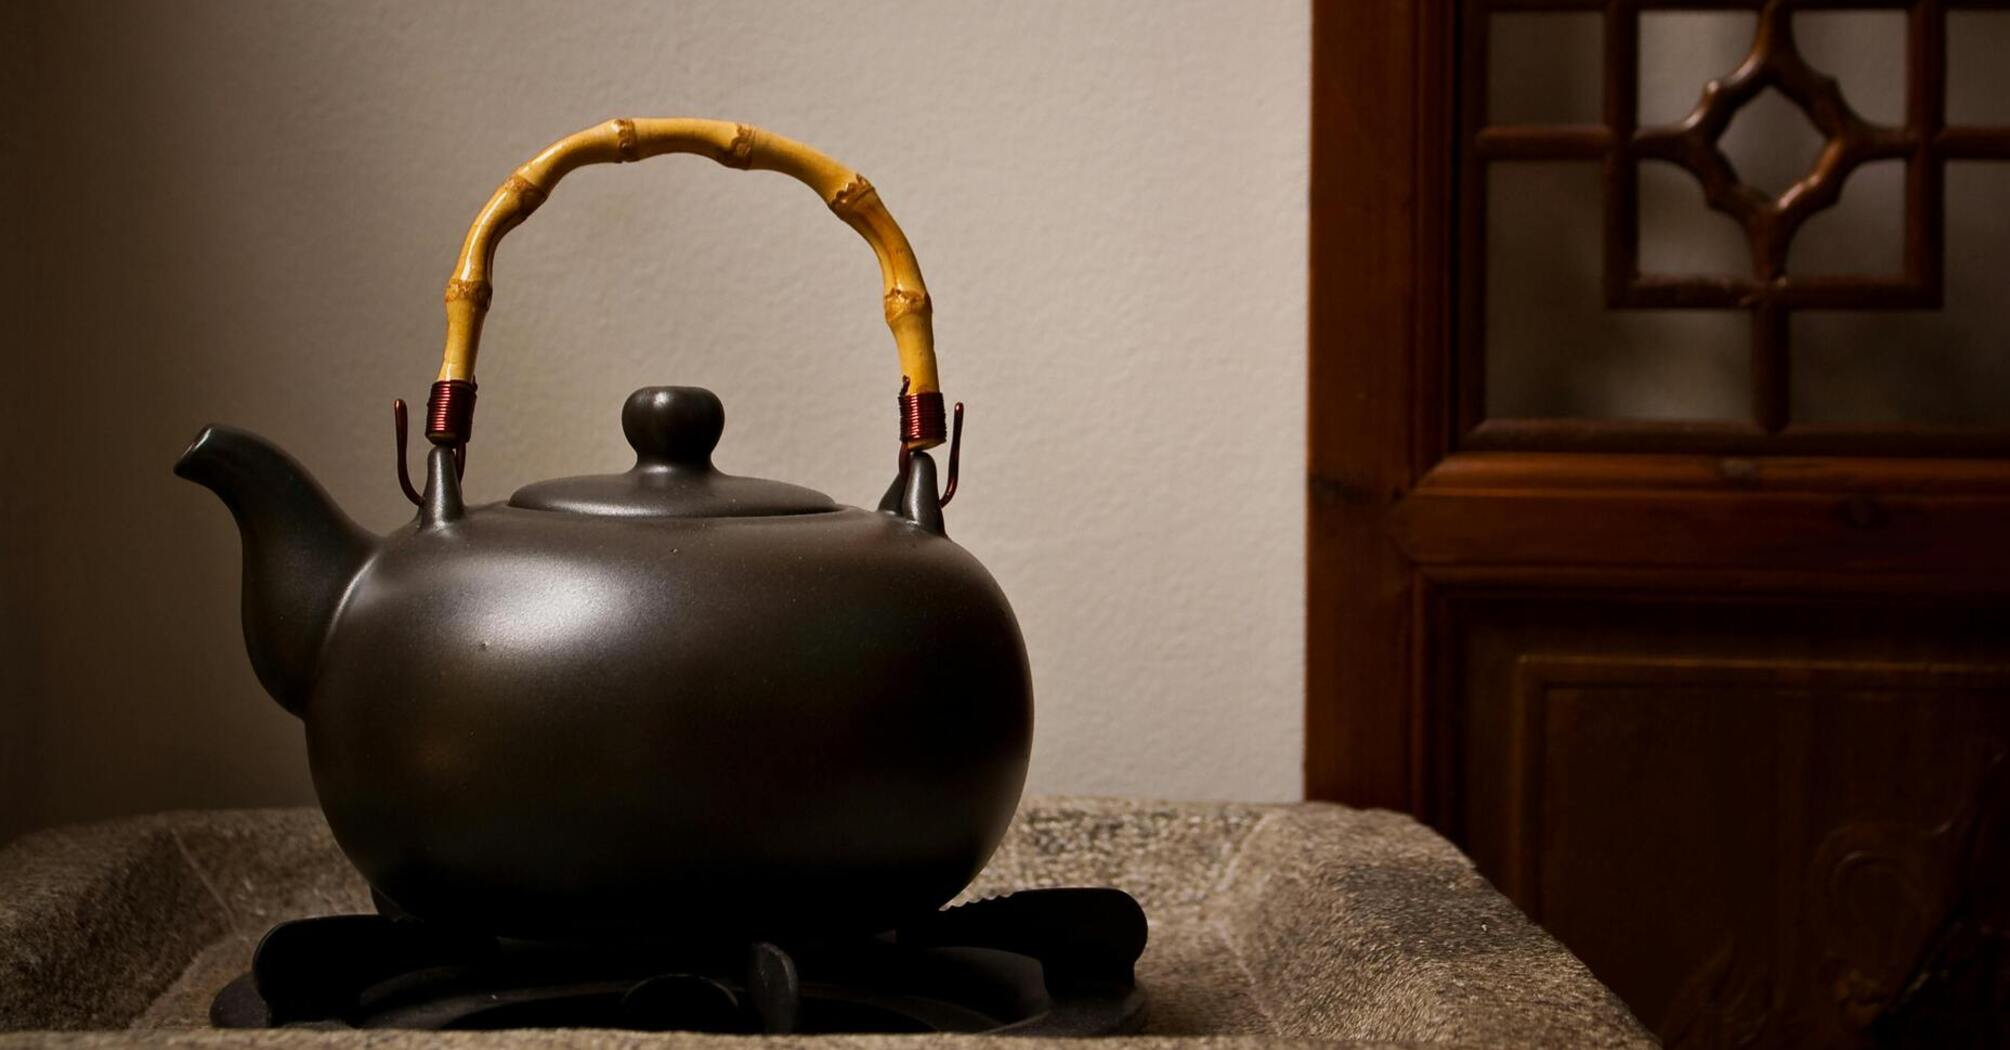 How to clean the kettle from grease and soot: 3 useful life hacks